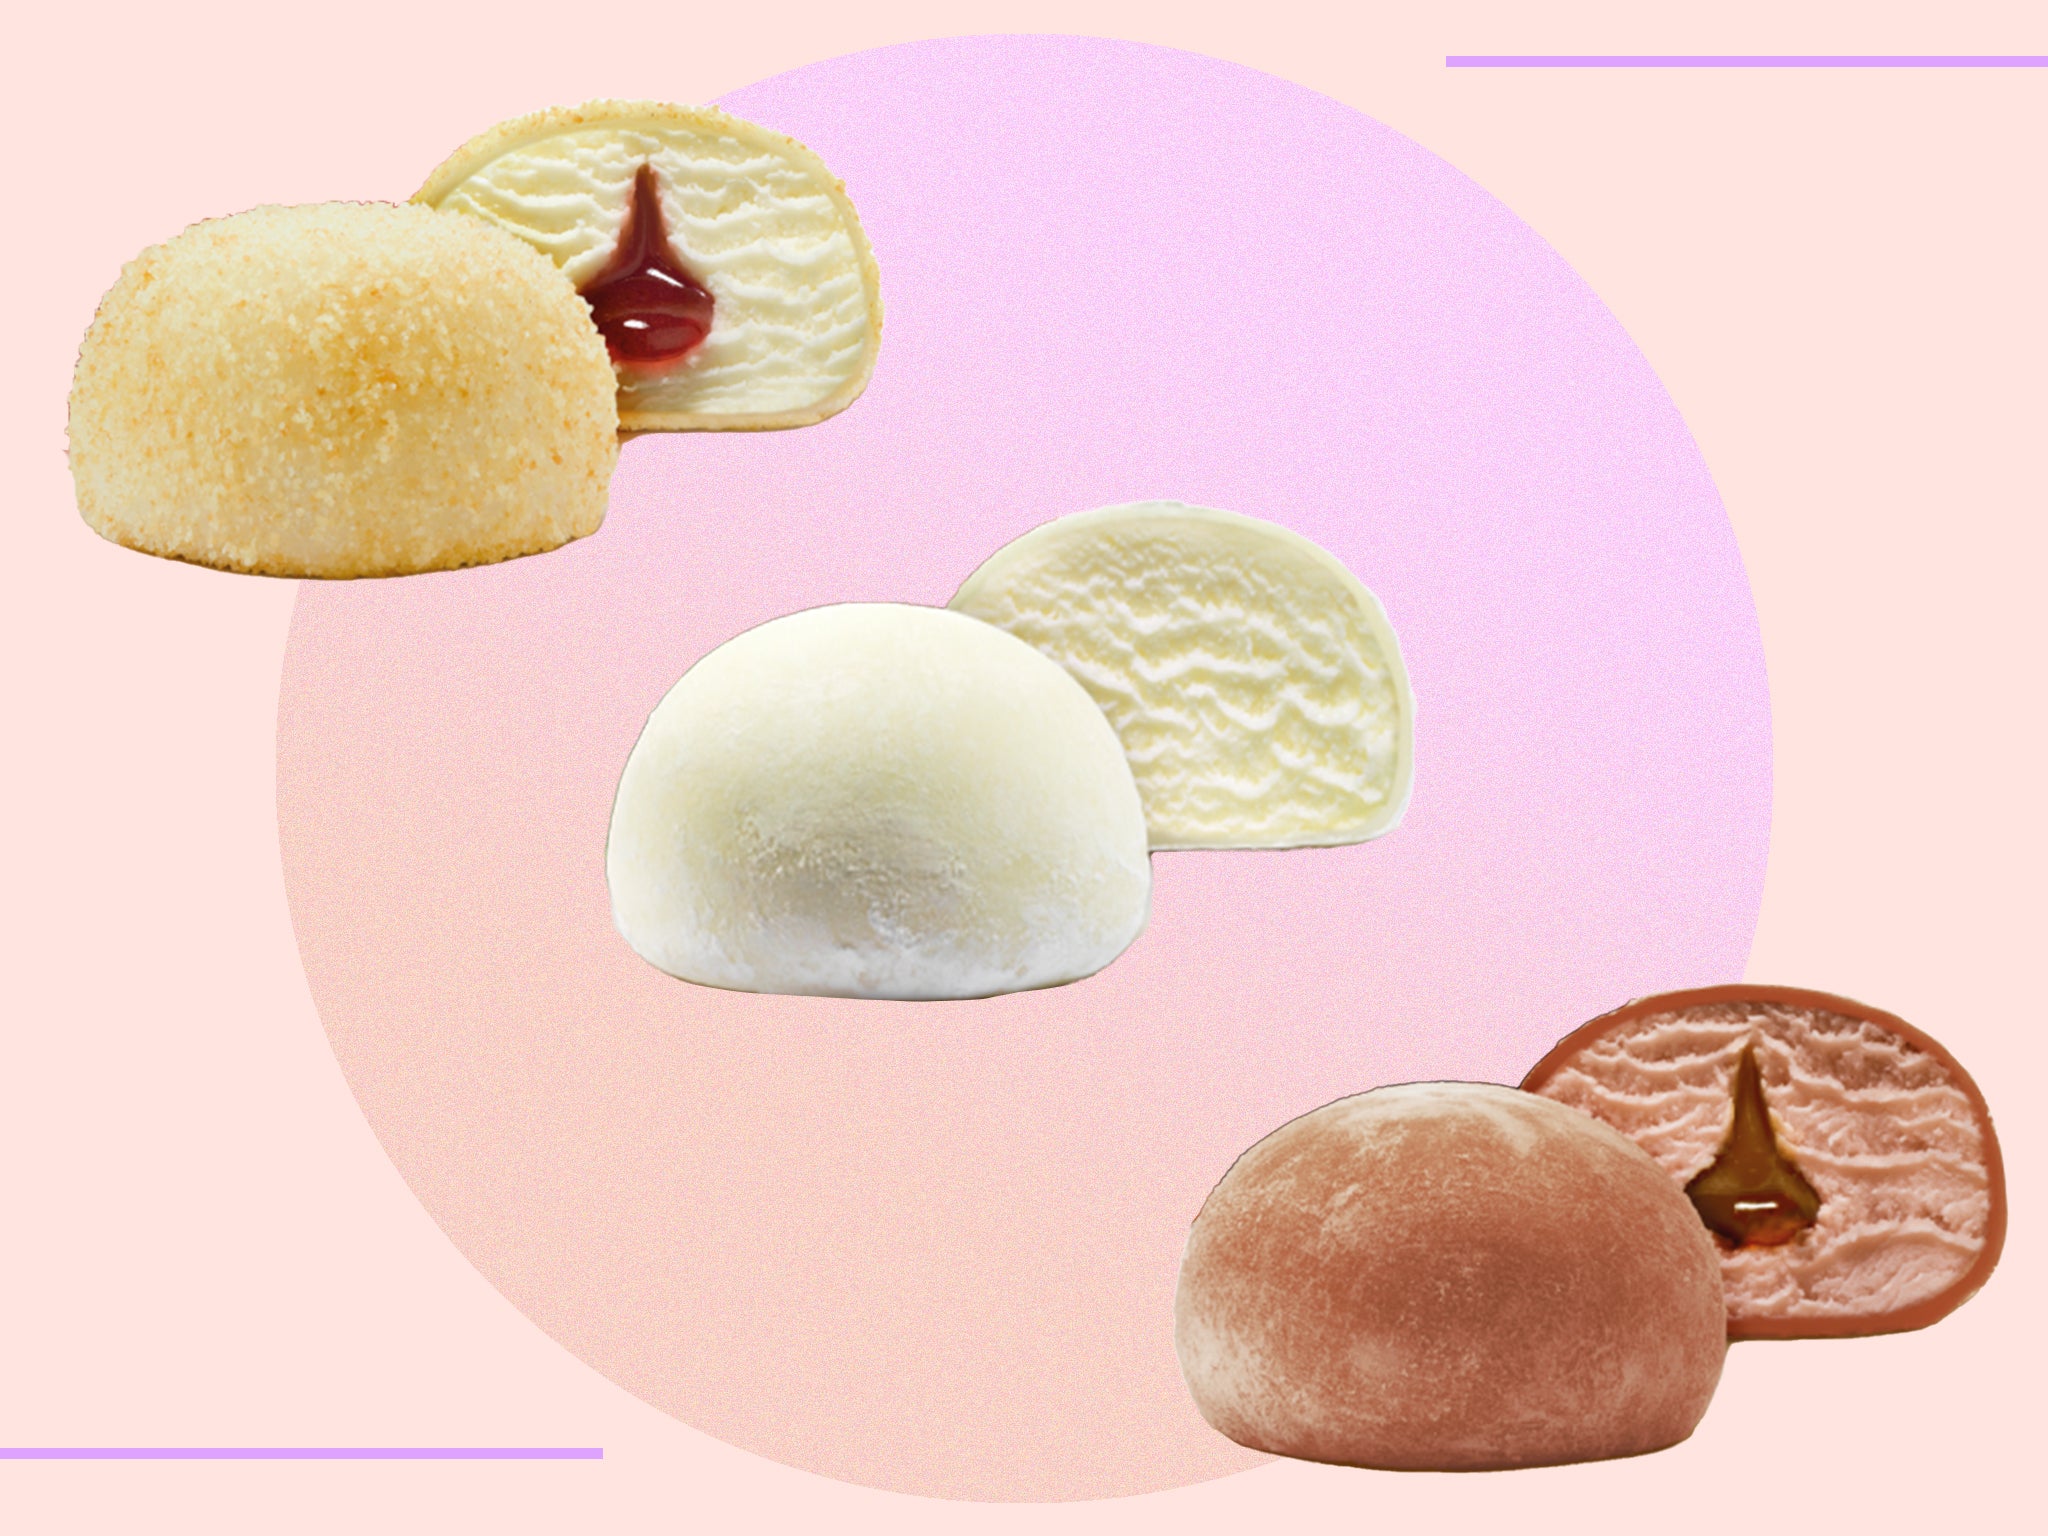 Caramel and cheesecake mochi balls have just landed at Aldi, see you in the freezer aisle!